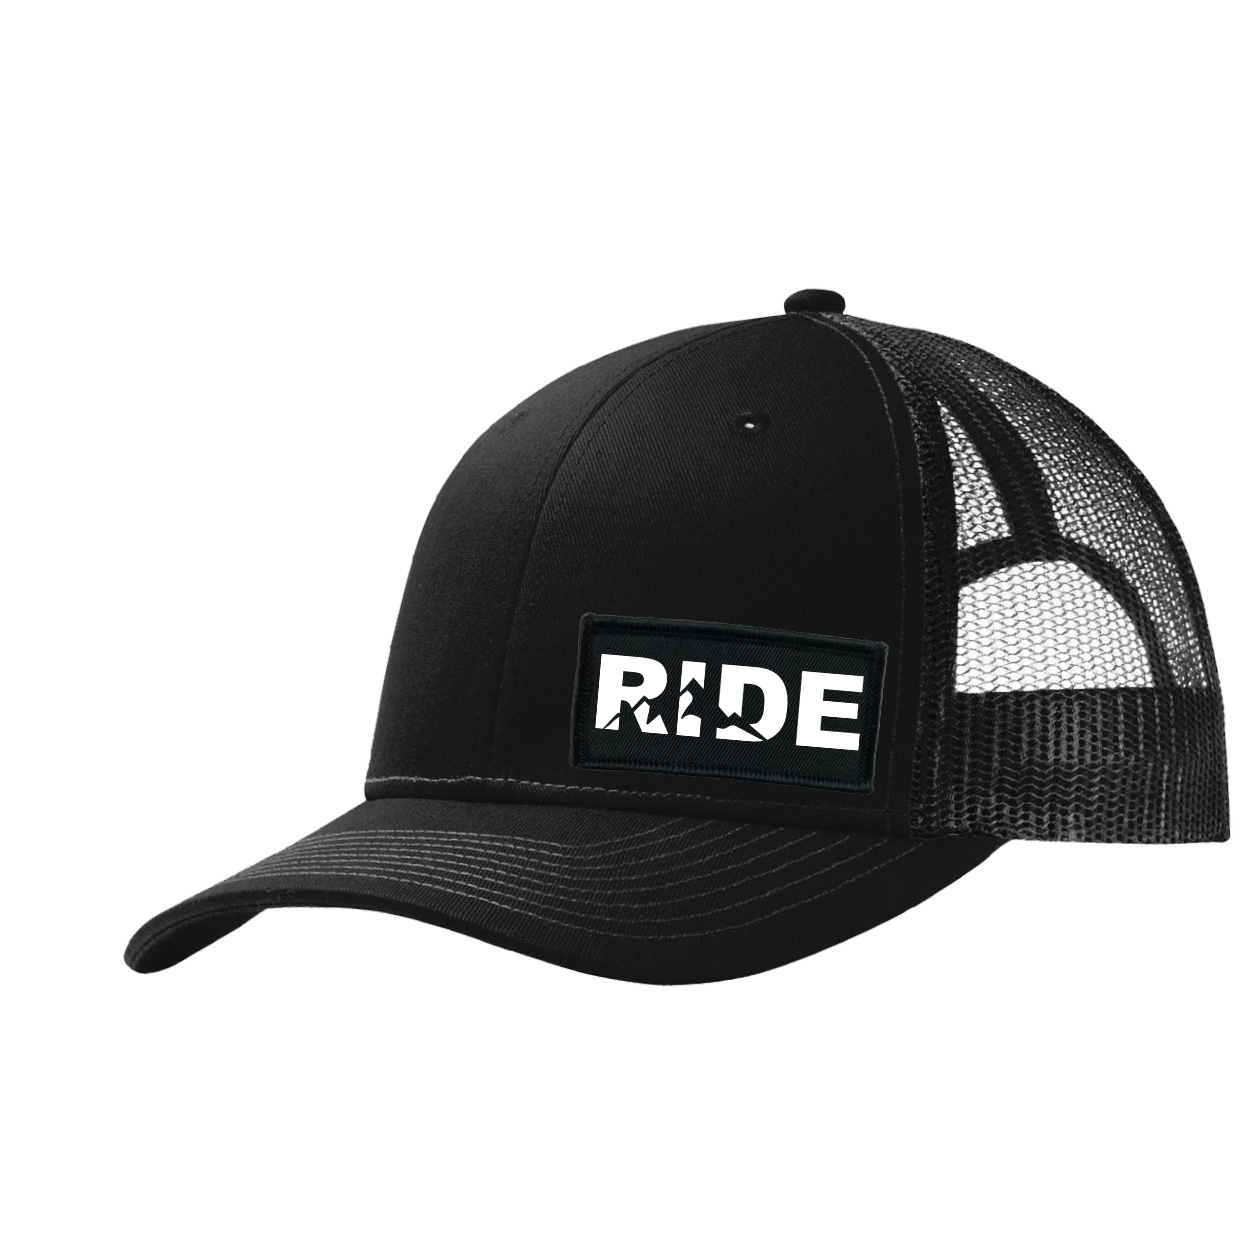 Ride Mountain Logo Night Out Woven Patch Snapback Trucker Hat Black